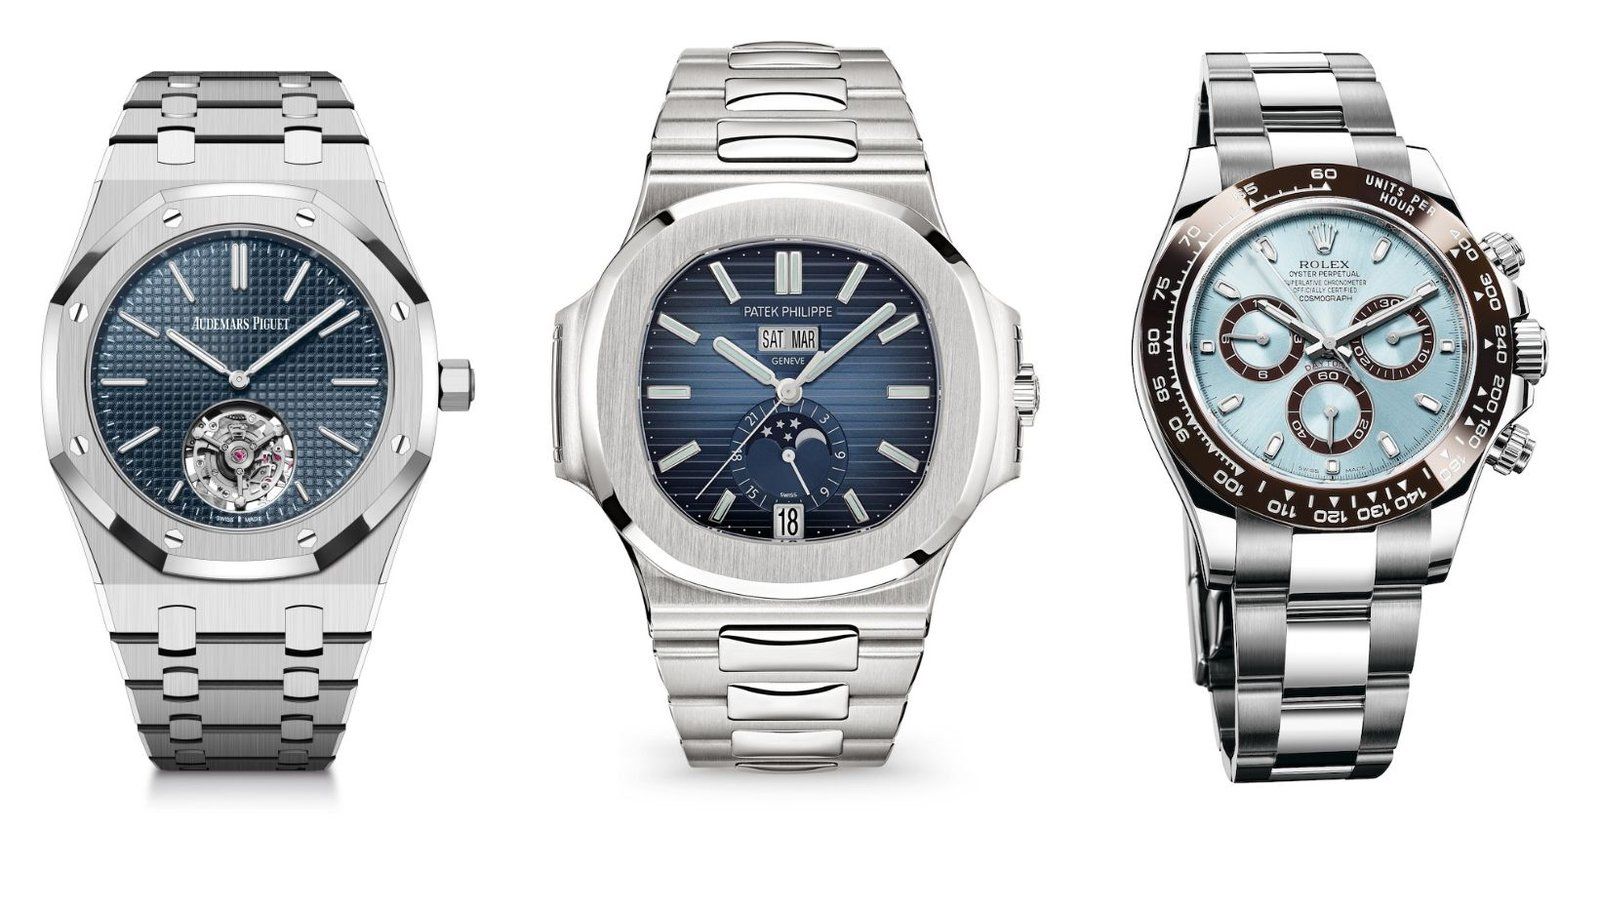 Top 5 Sports Steel Watches